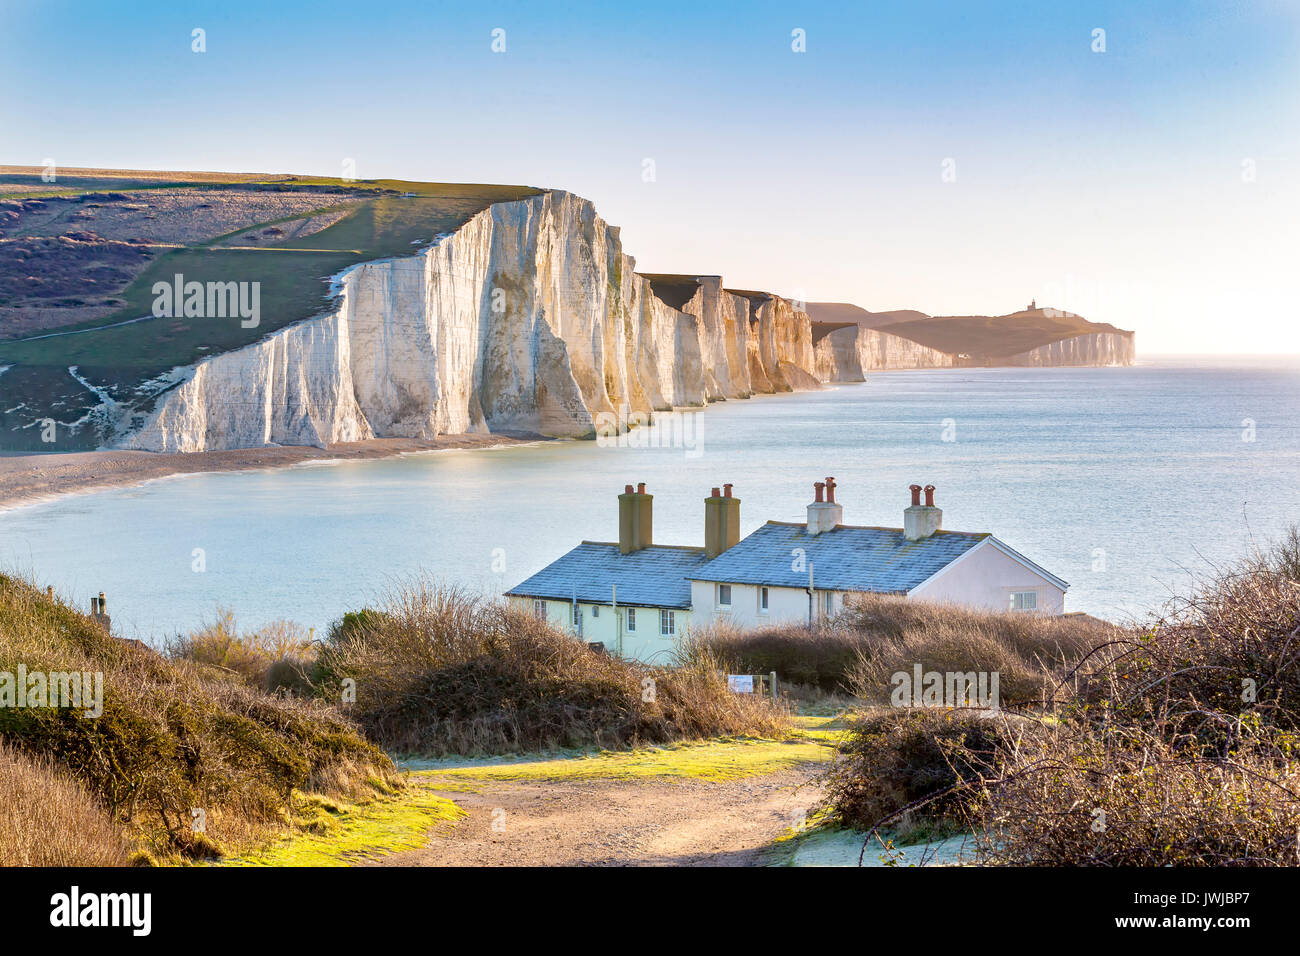 The Coast Guard Cottages & Seven Sisters Chalk Cliffs just outside Eastbourne, Sussex, England, UK. Stock Photo